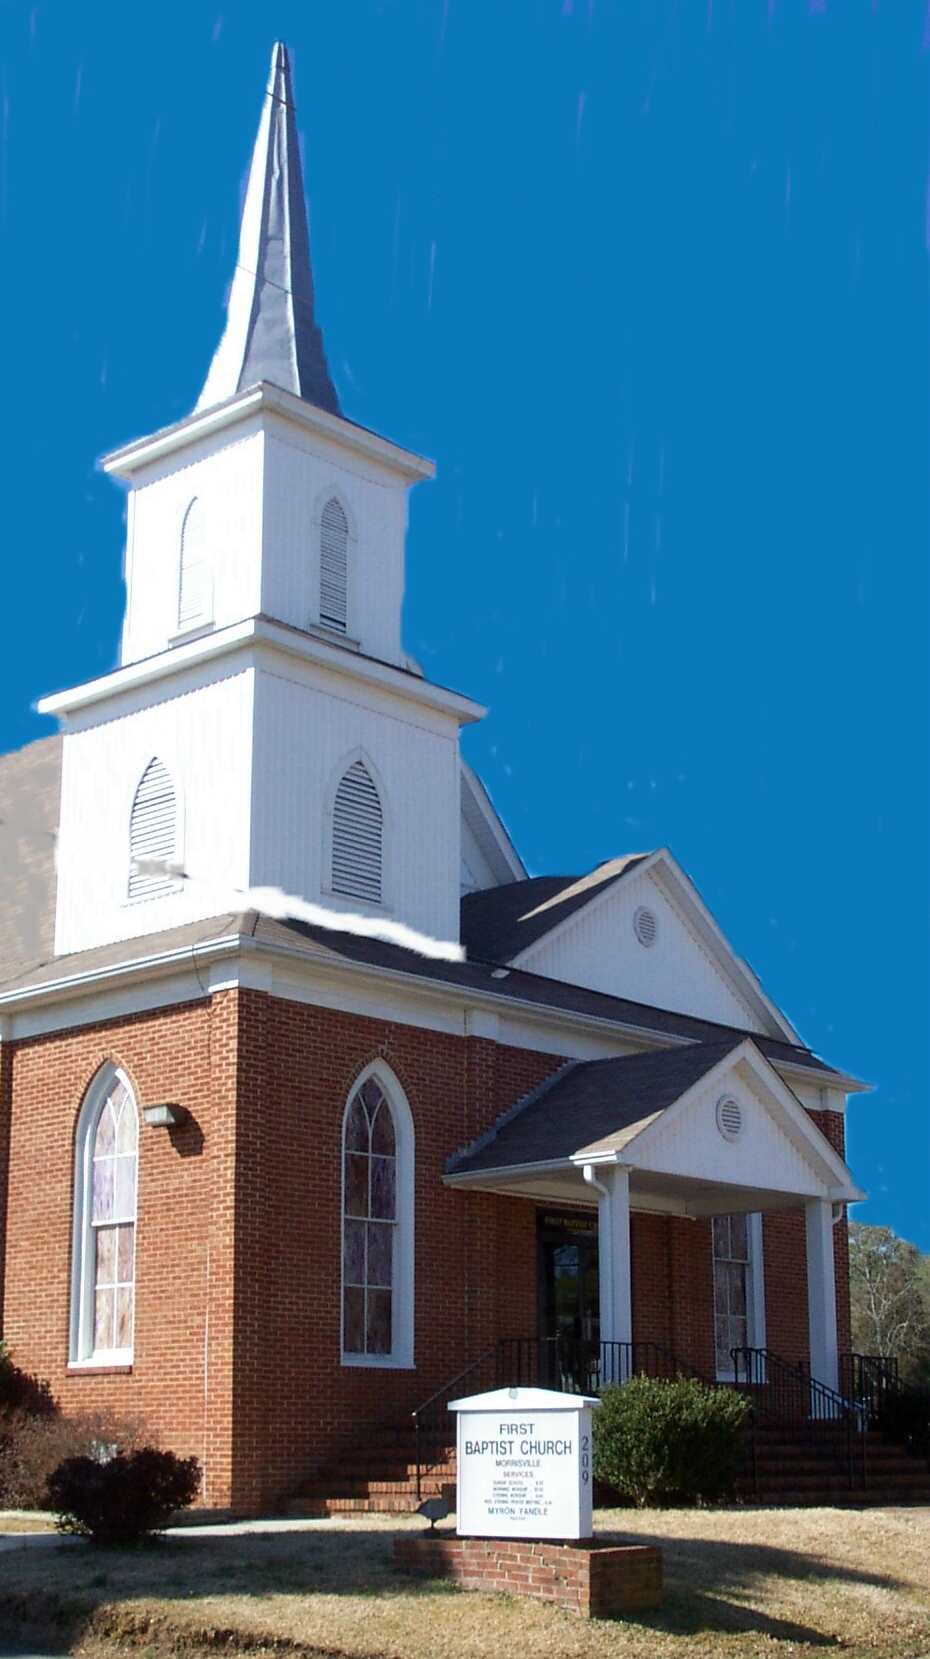 First Baptist Church of Morrisville, a light house in our community since 1866